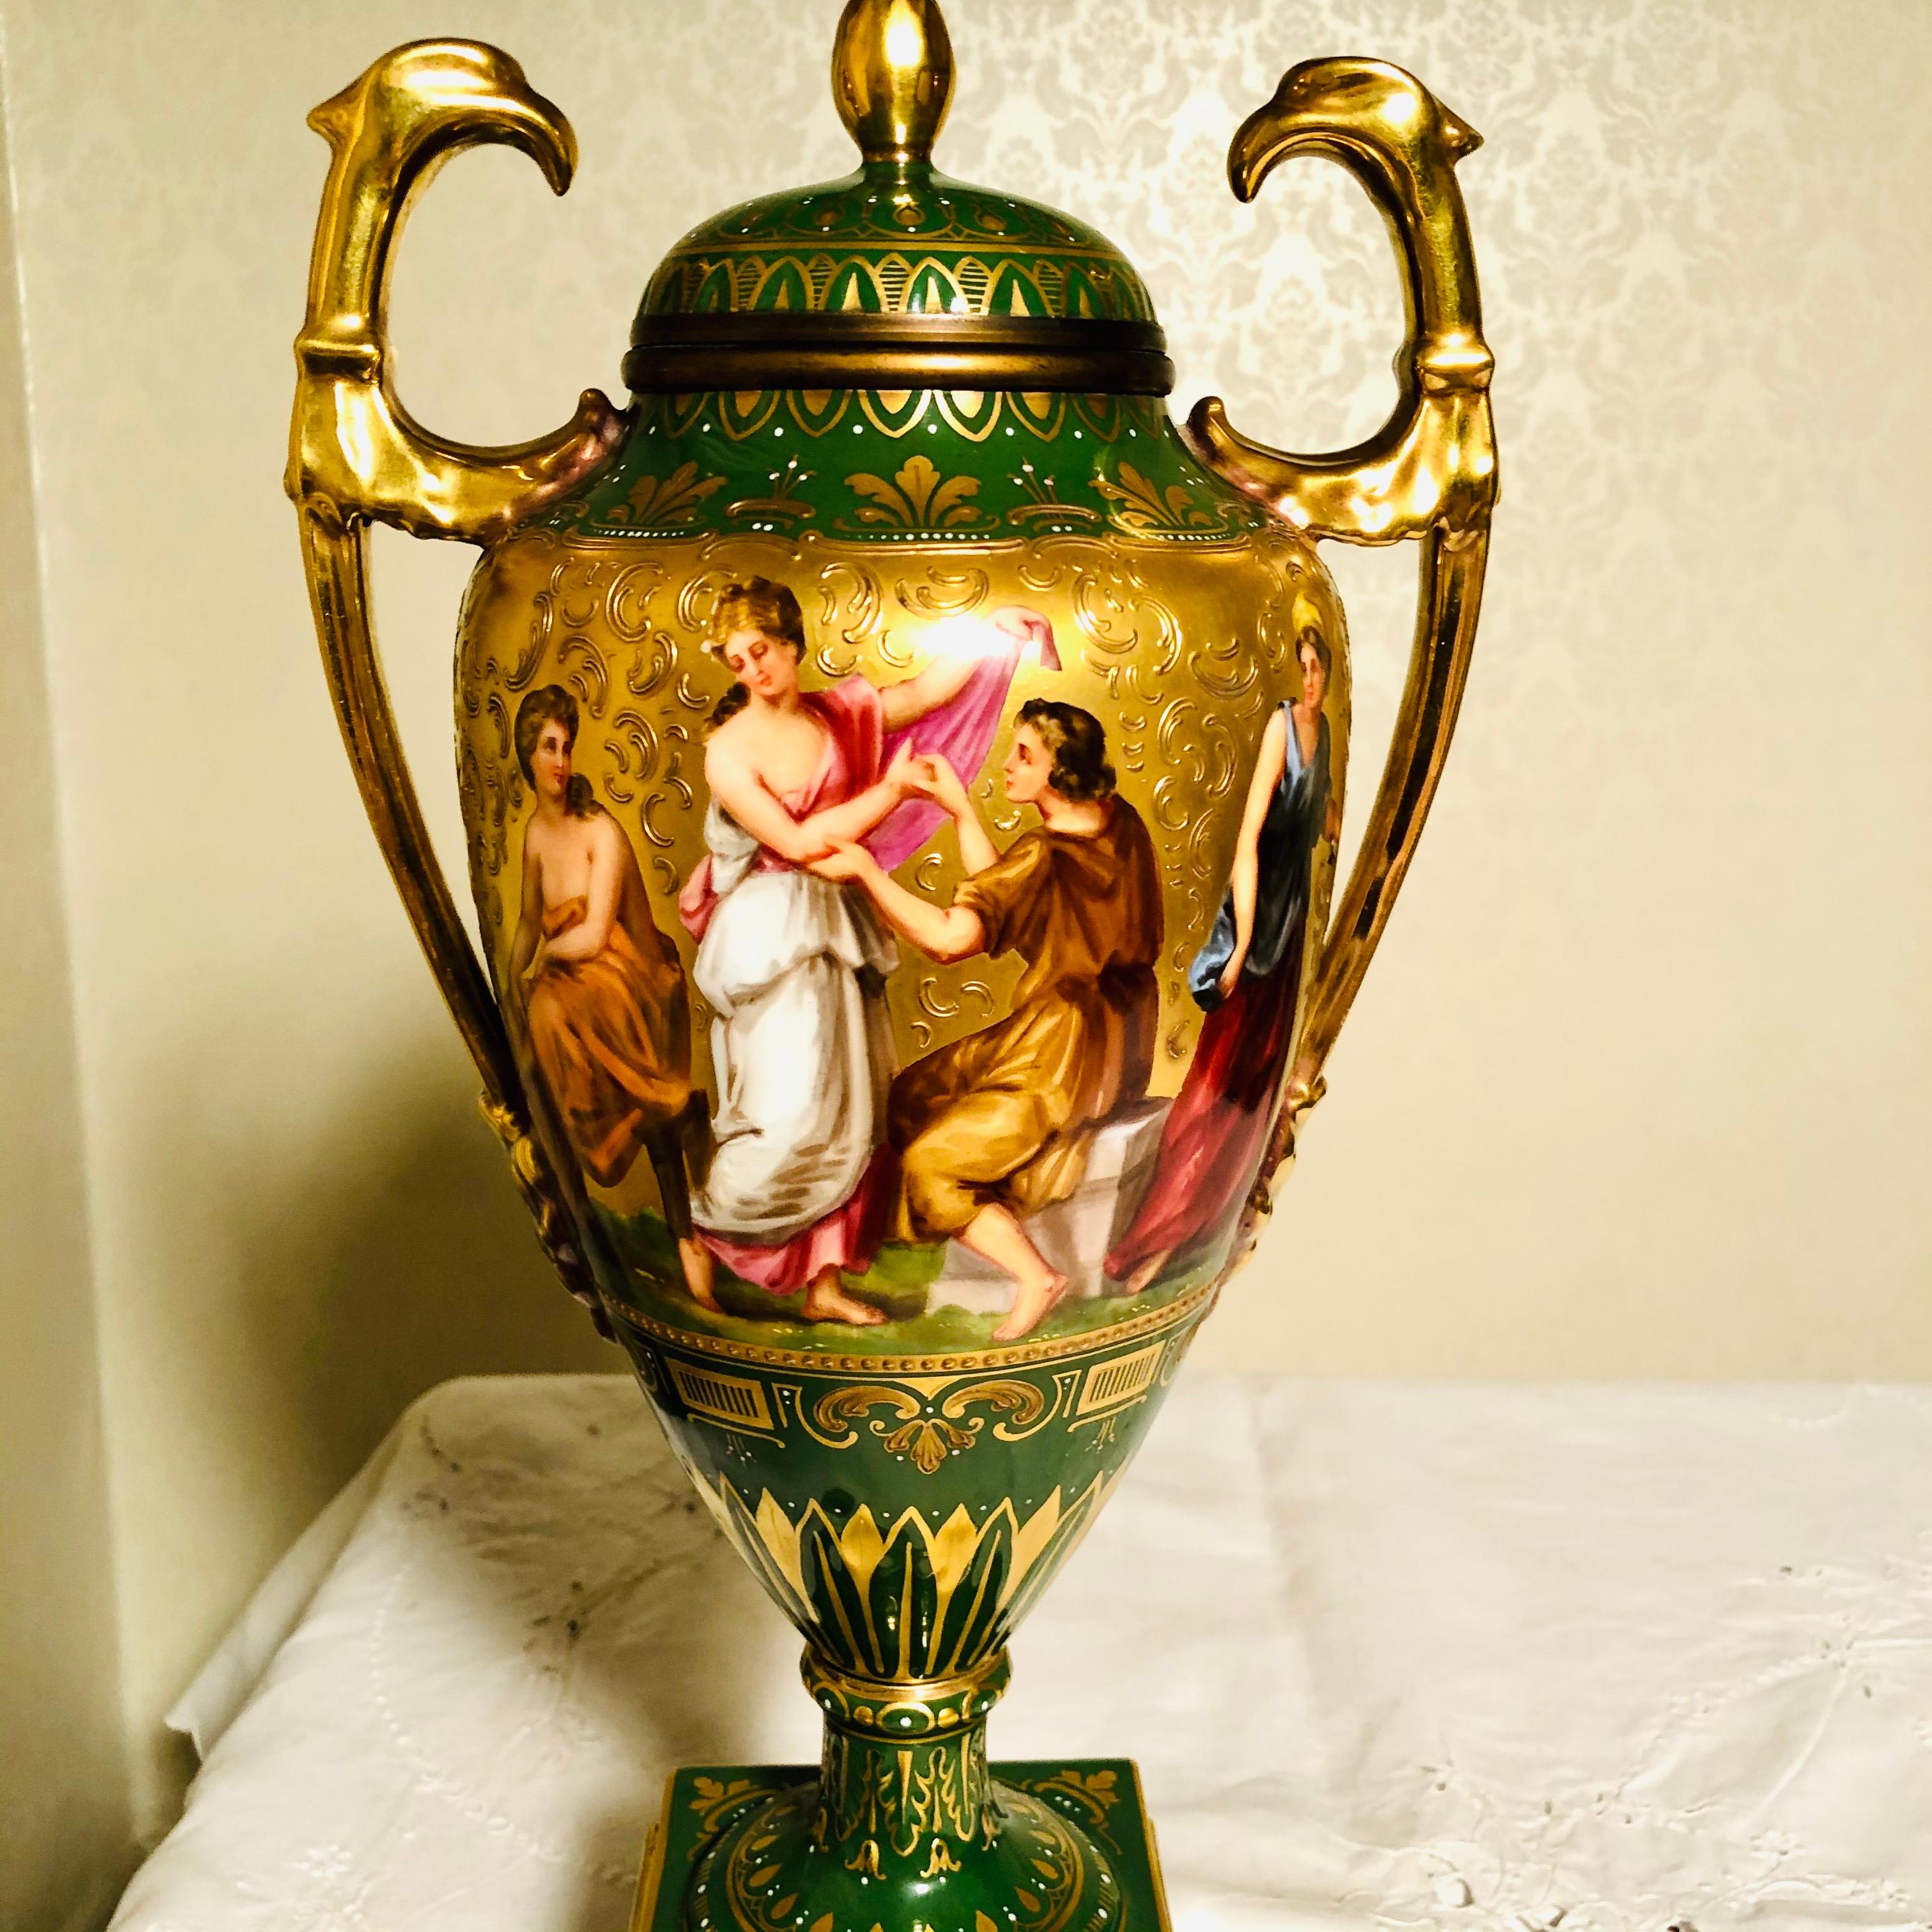 I want to offer you this amazing “Royal Vienna” style urn with a green background with exquisite paintings on both sides. The paintings are entitled 